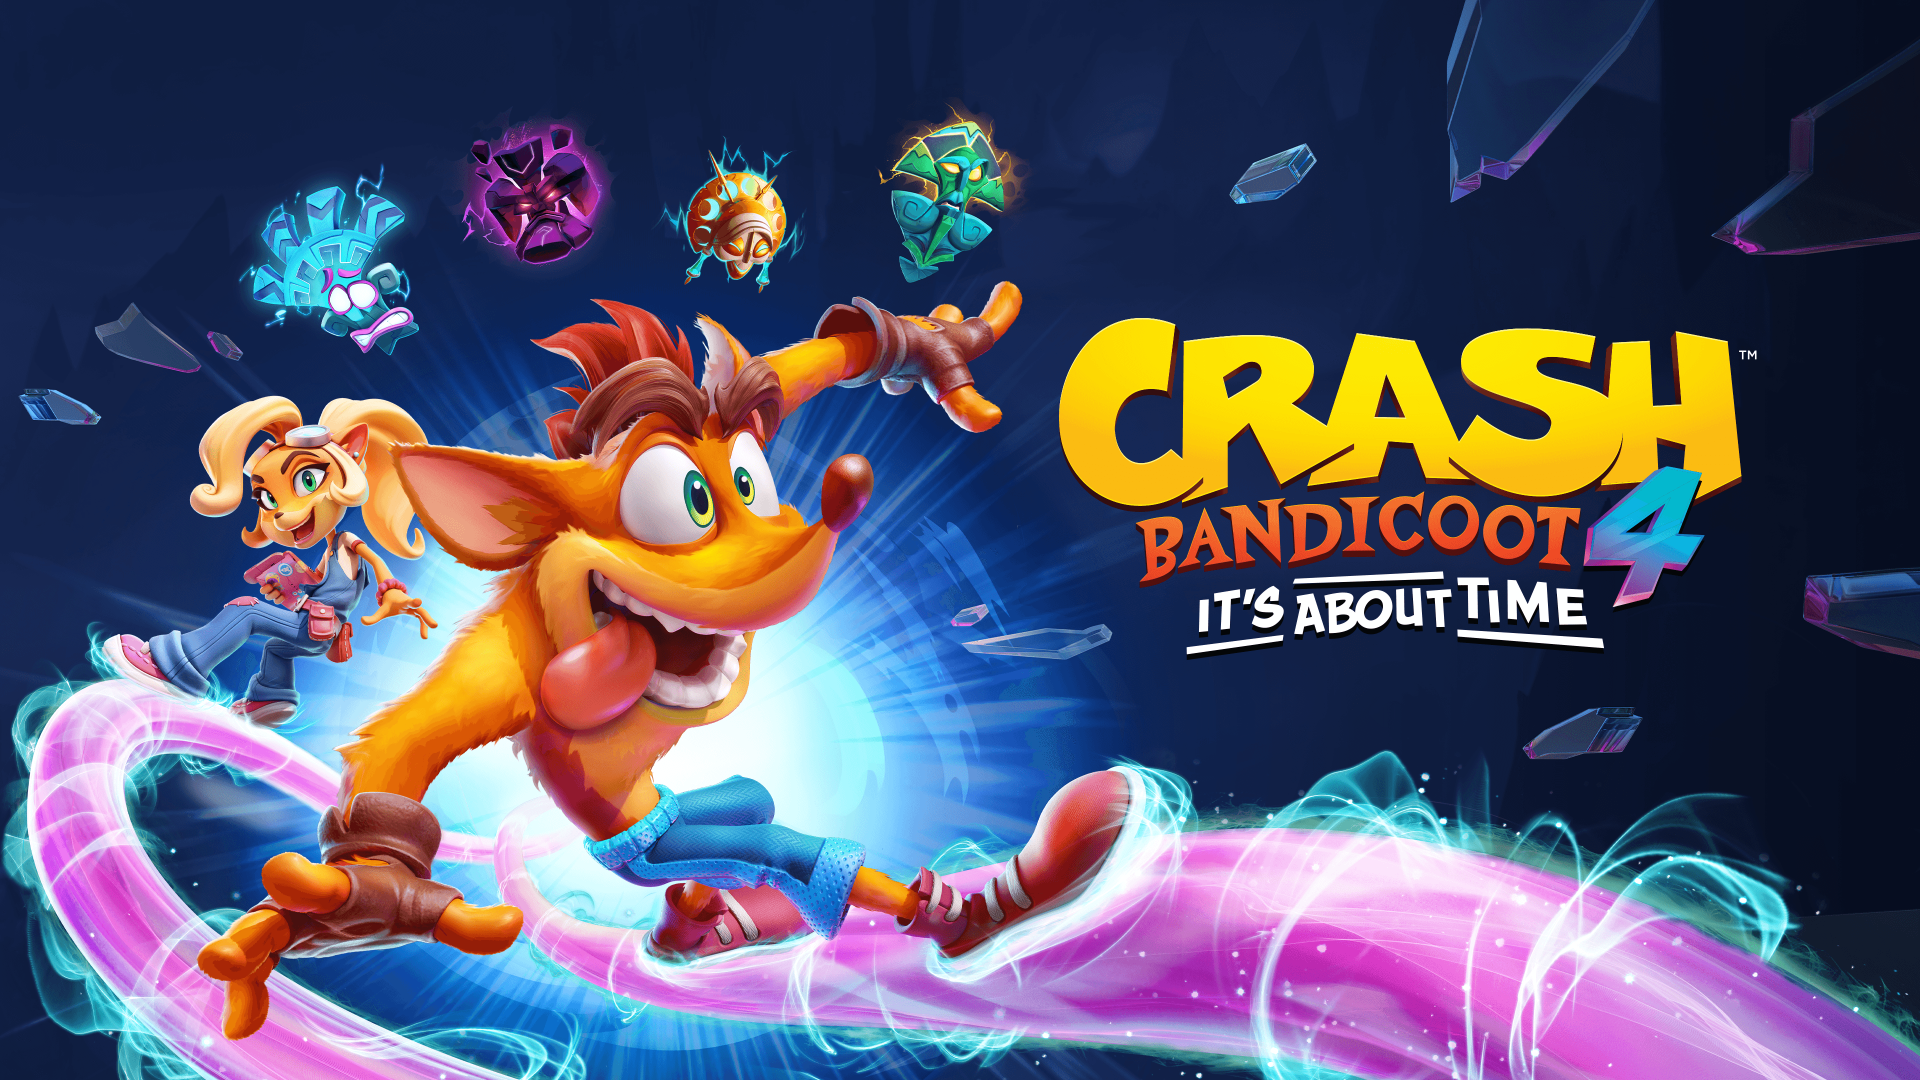 Crash bandioot 4 It's About time